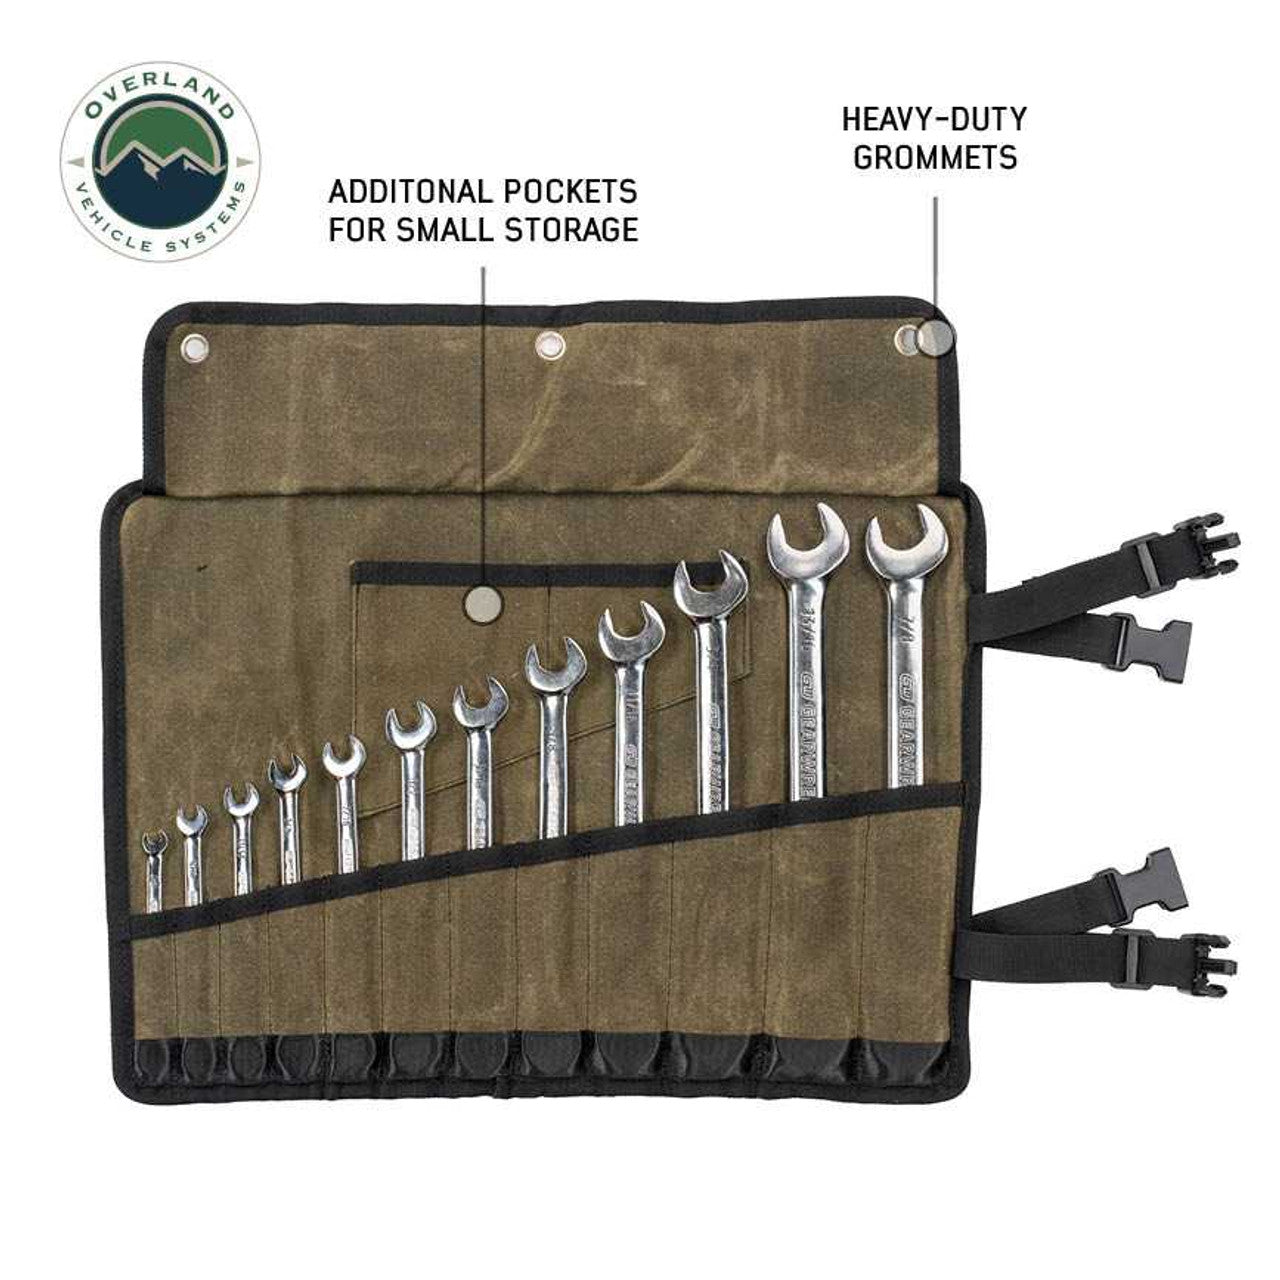 OVS Wrench Tool Roll #16 Waxed Canvas Storage Bags